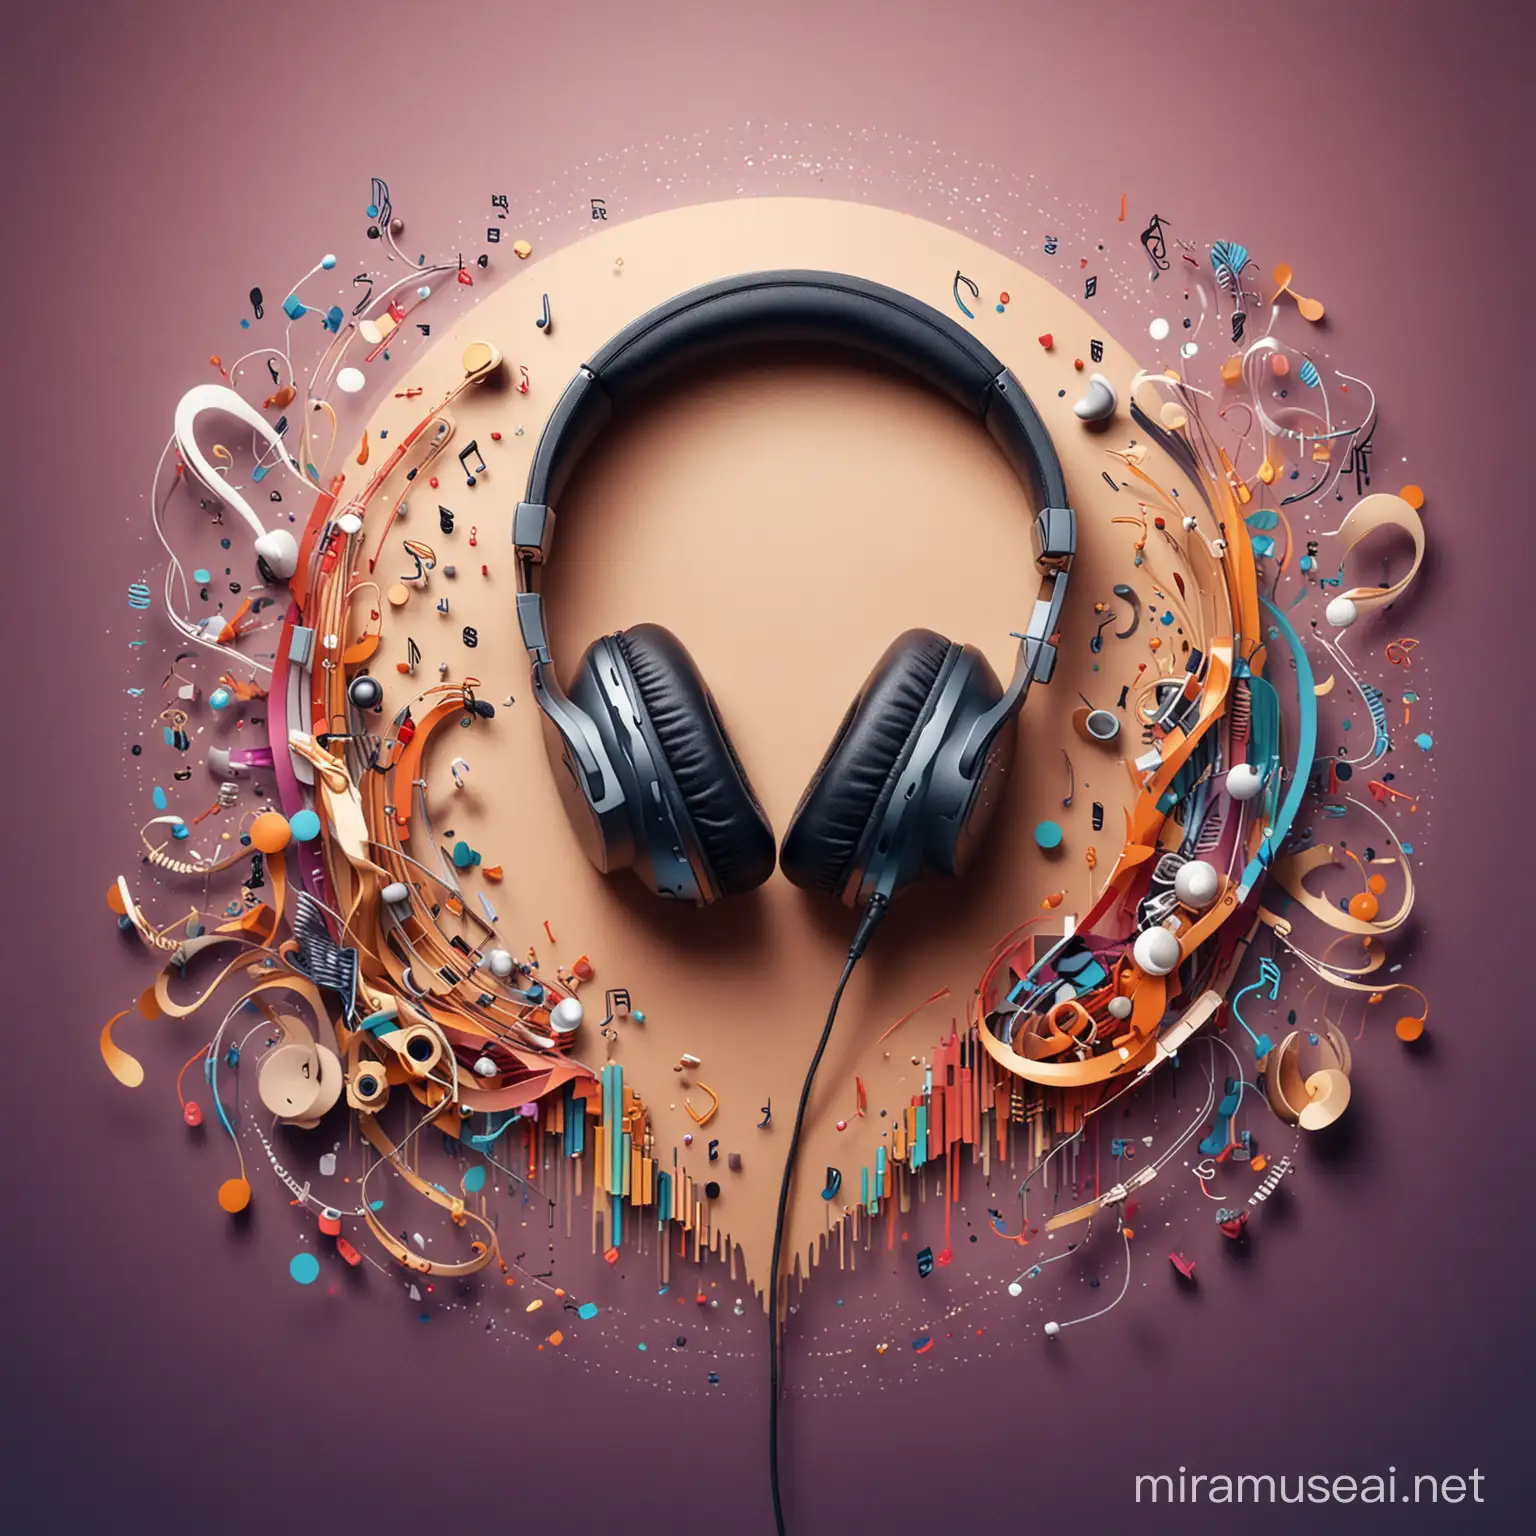 An image with a beautiful designed background with various music tools and hearings like headphones 